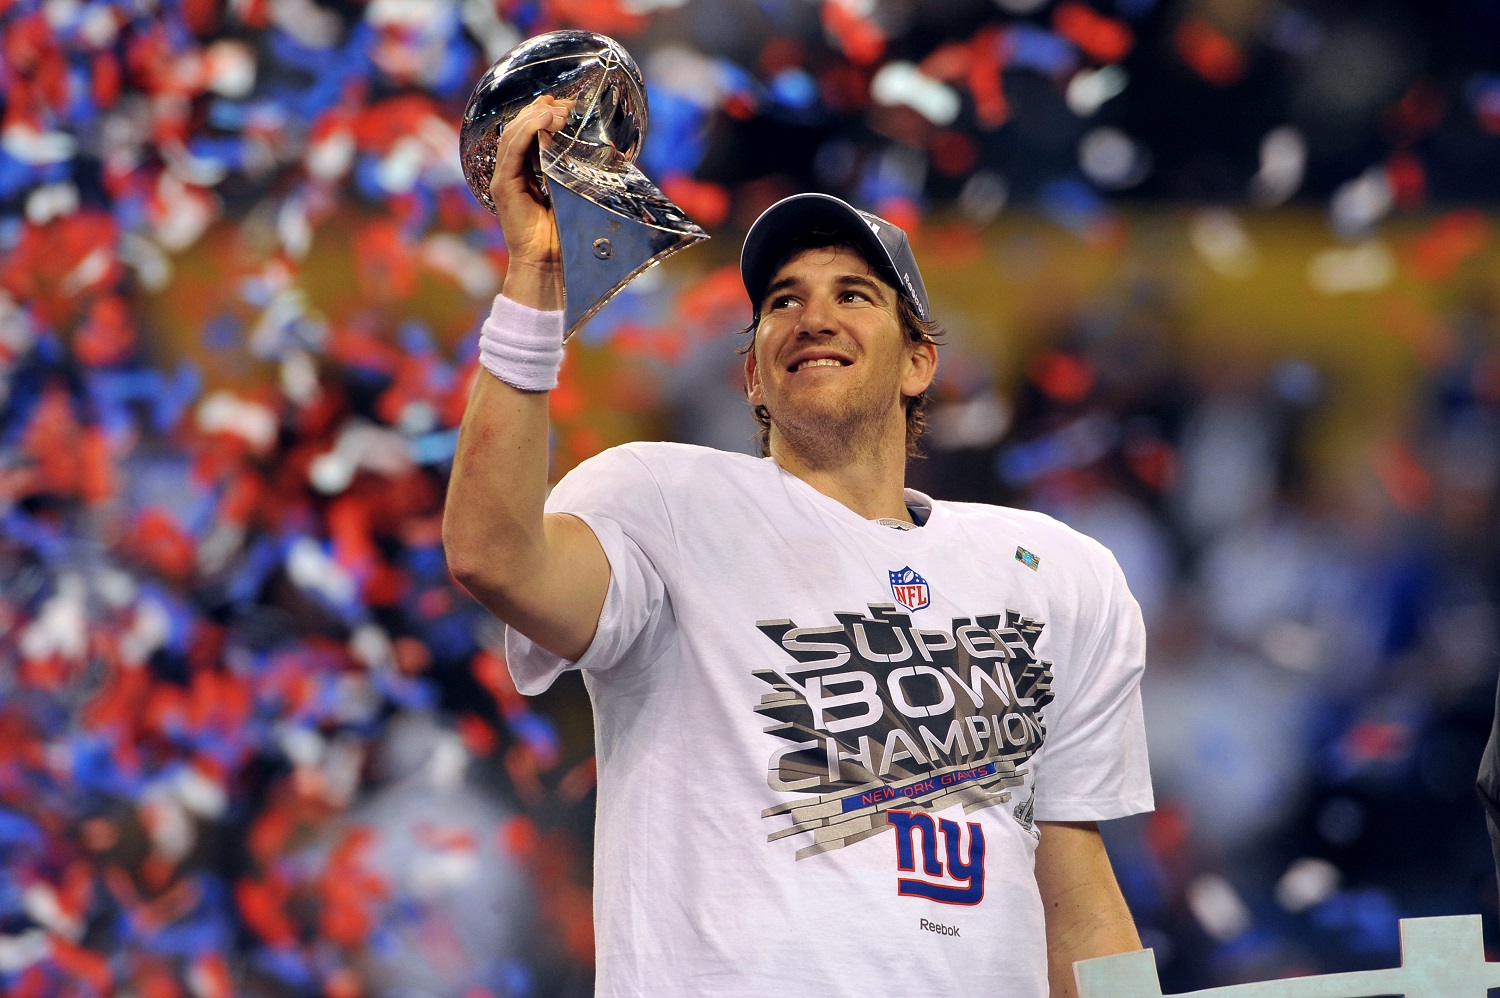 Eli Manning of the New York Giants raises the Lombardi Trophy after beating the New England Patriots in Super Bowl 46.